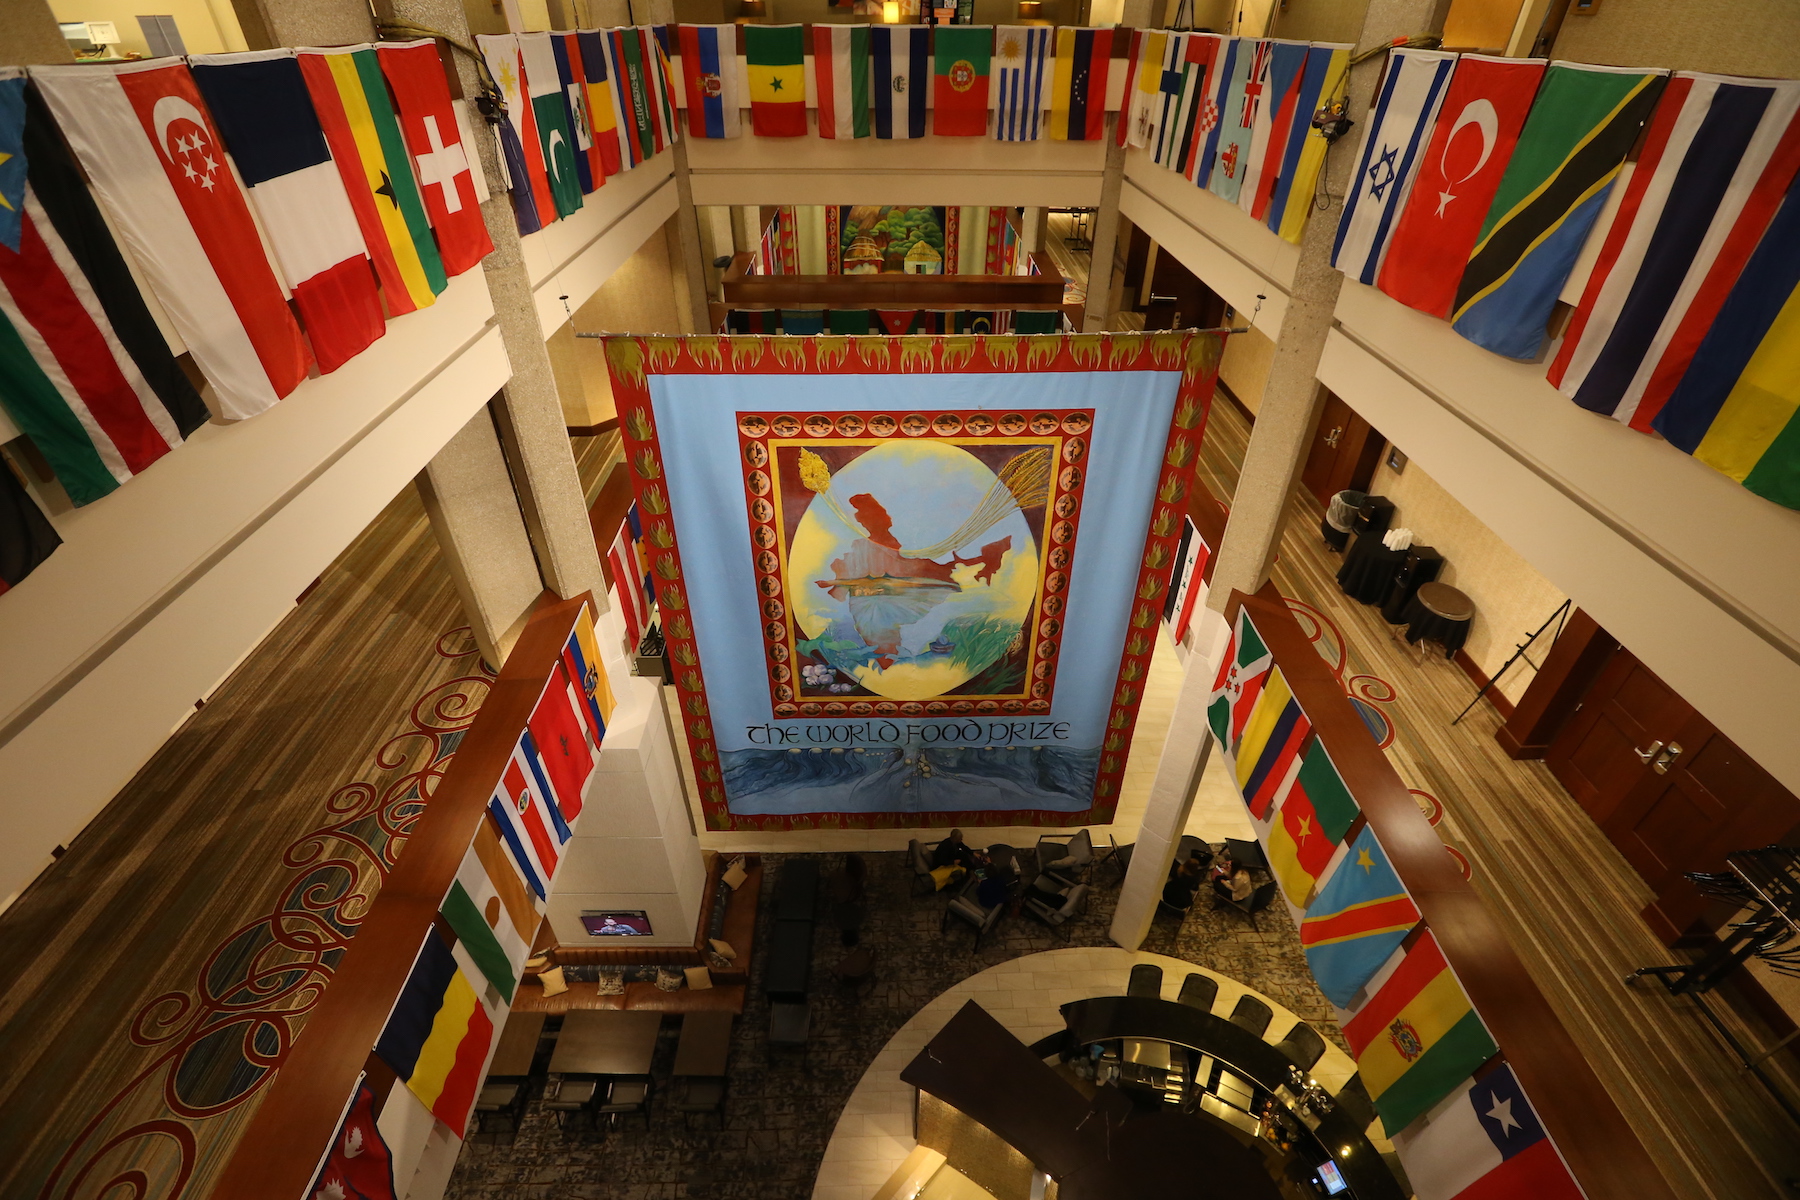 General view of the 2018 Borlaug Dialogue venue. (Photo: World Food Prize)